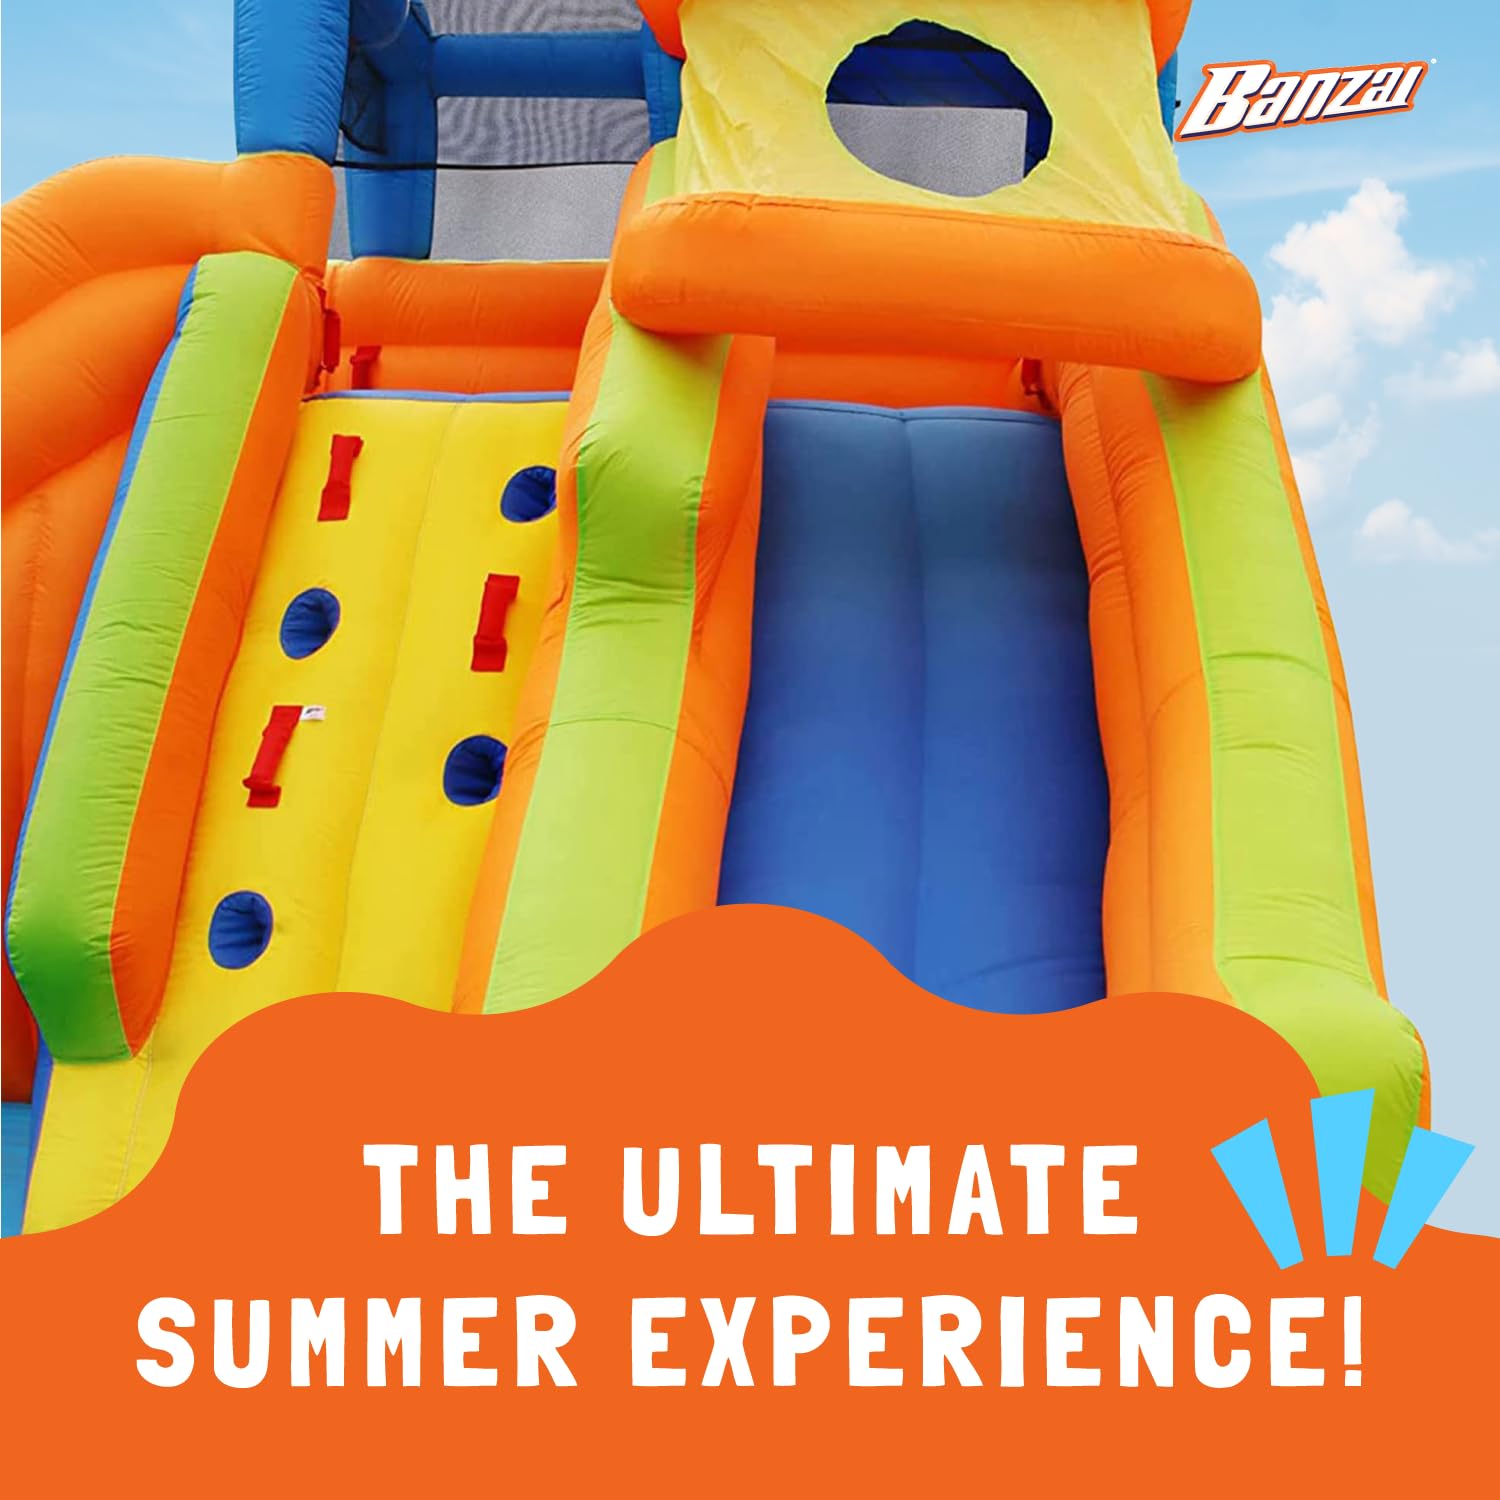 BANZAI Drop Zone 14.5' L x 13.3' W x 8' H Inflatable Water Park with Waterslide, Sprinklers, and Water Cannon